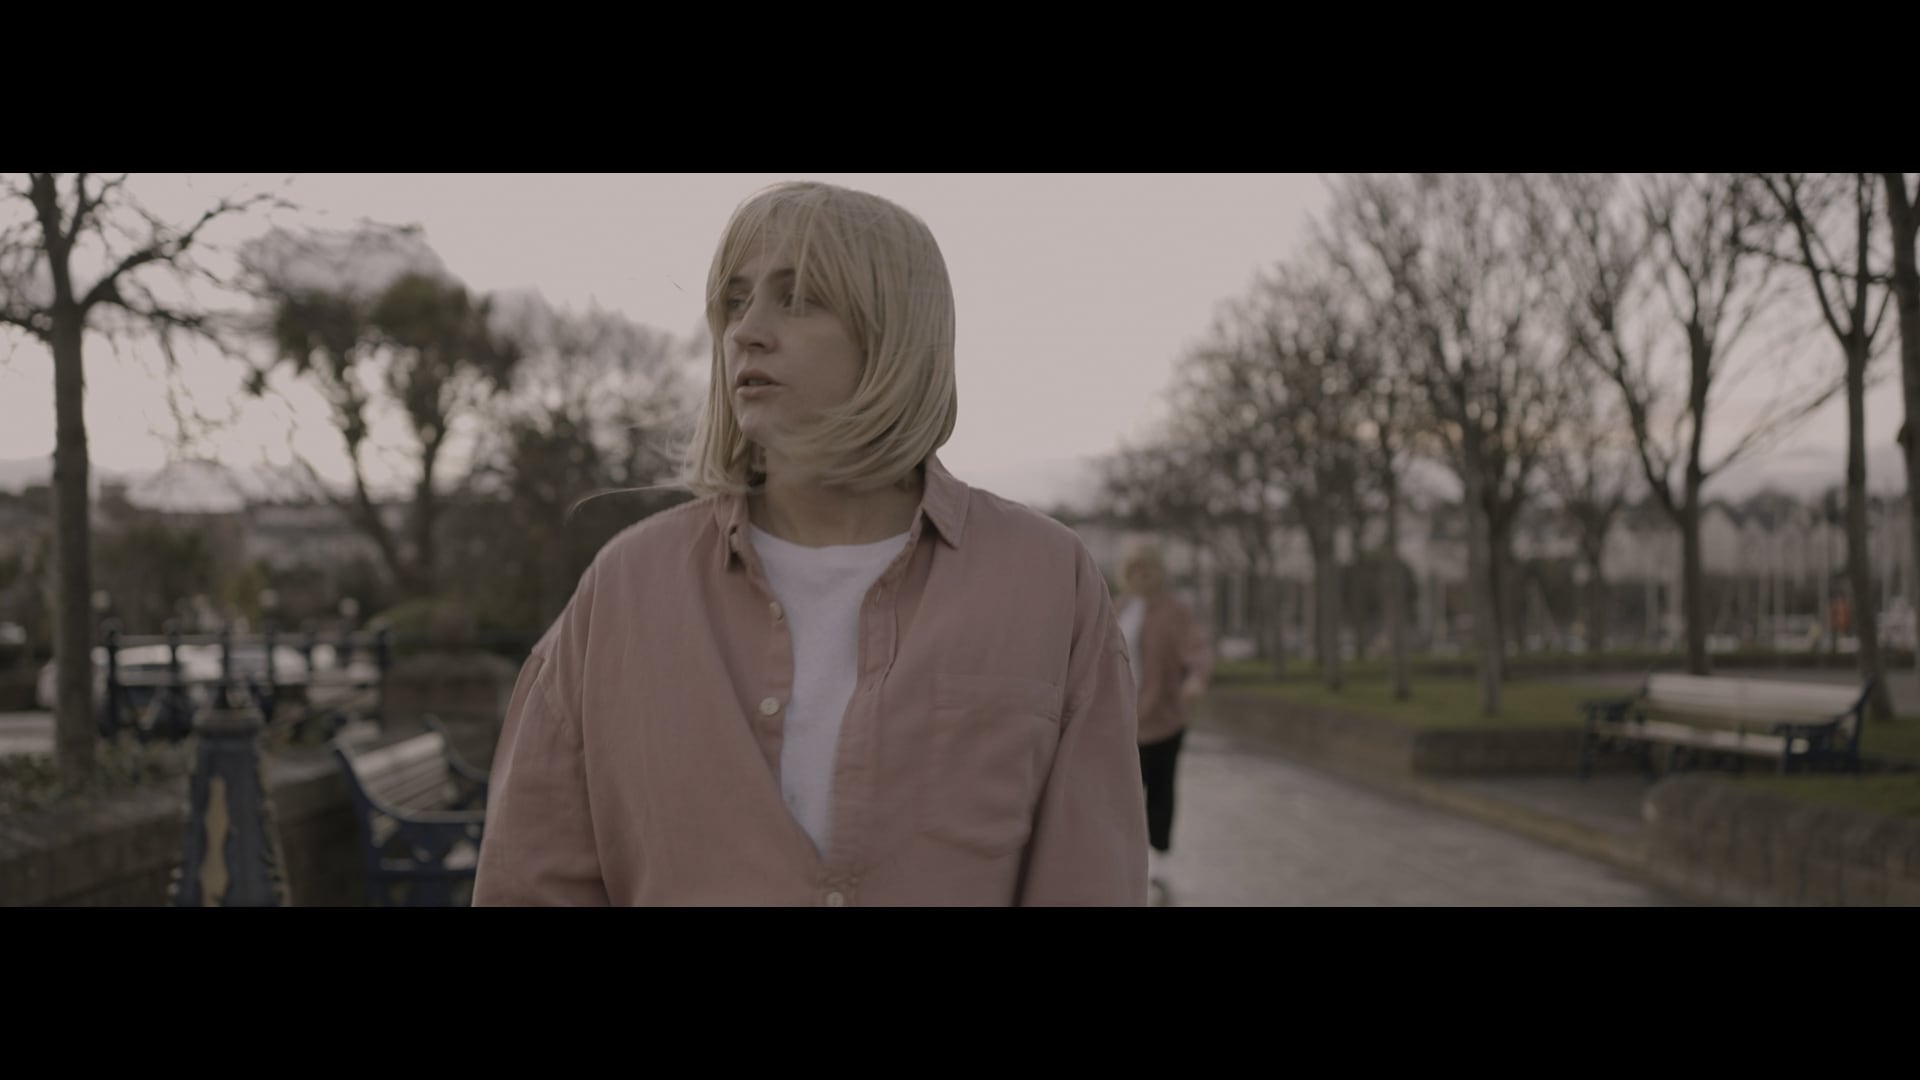 Woman in salmon shirt and blonde wig in the foreground, behind her, blurred is another in the same outfit. Both pictured against a tree-lined park road on a grey day